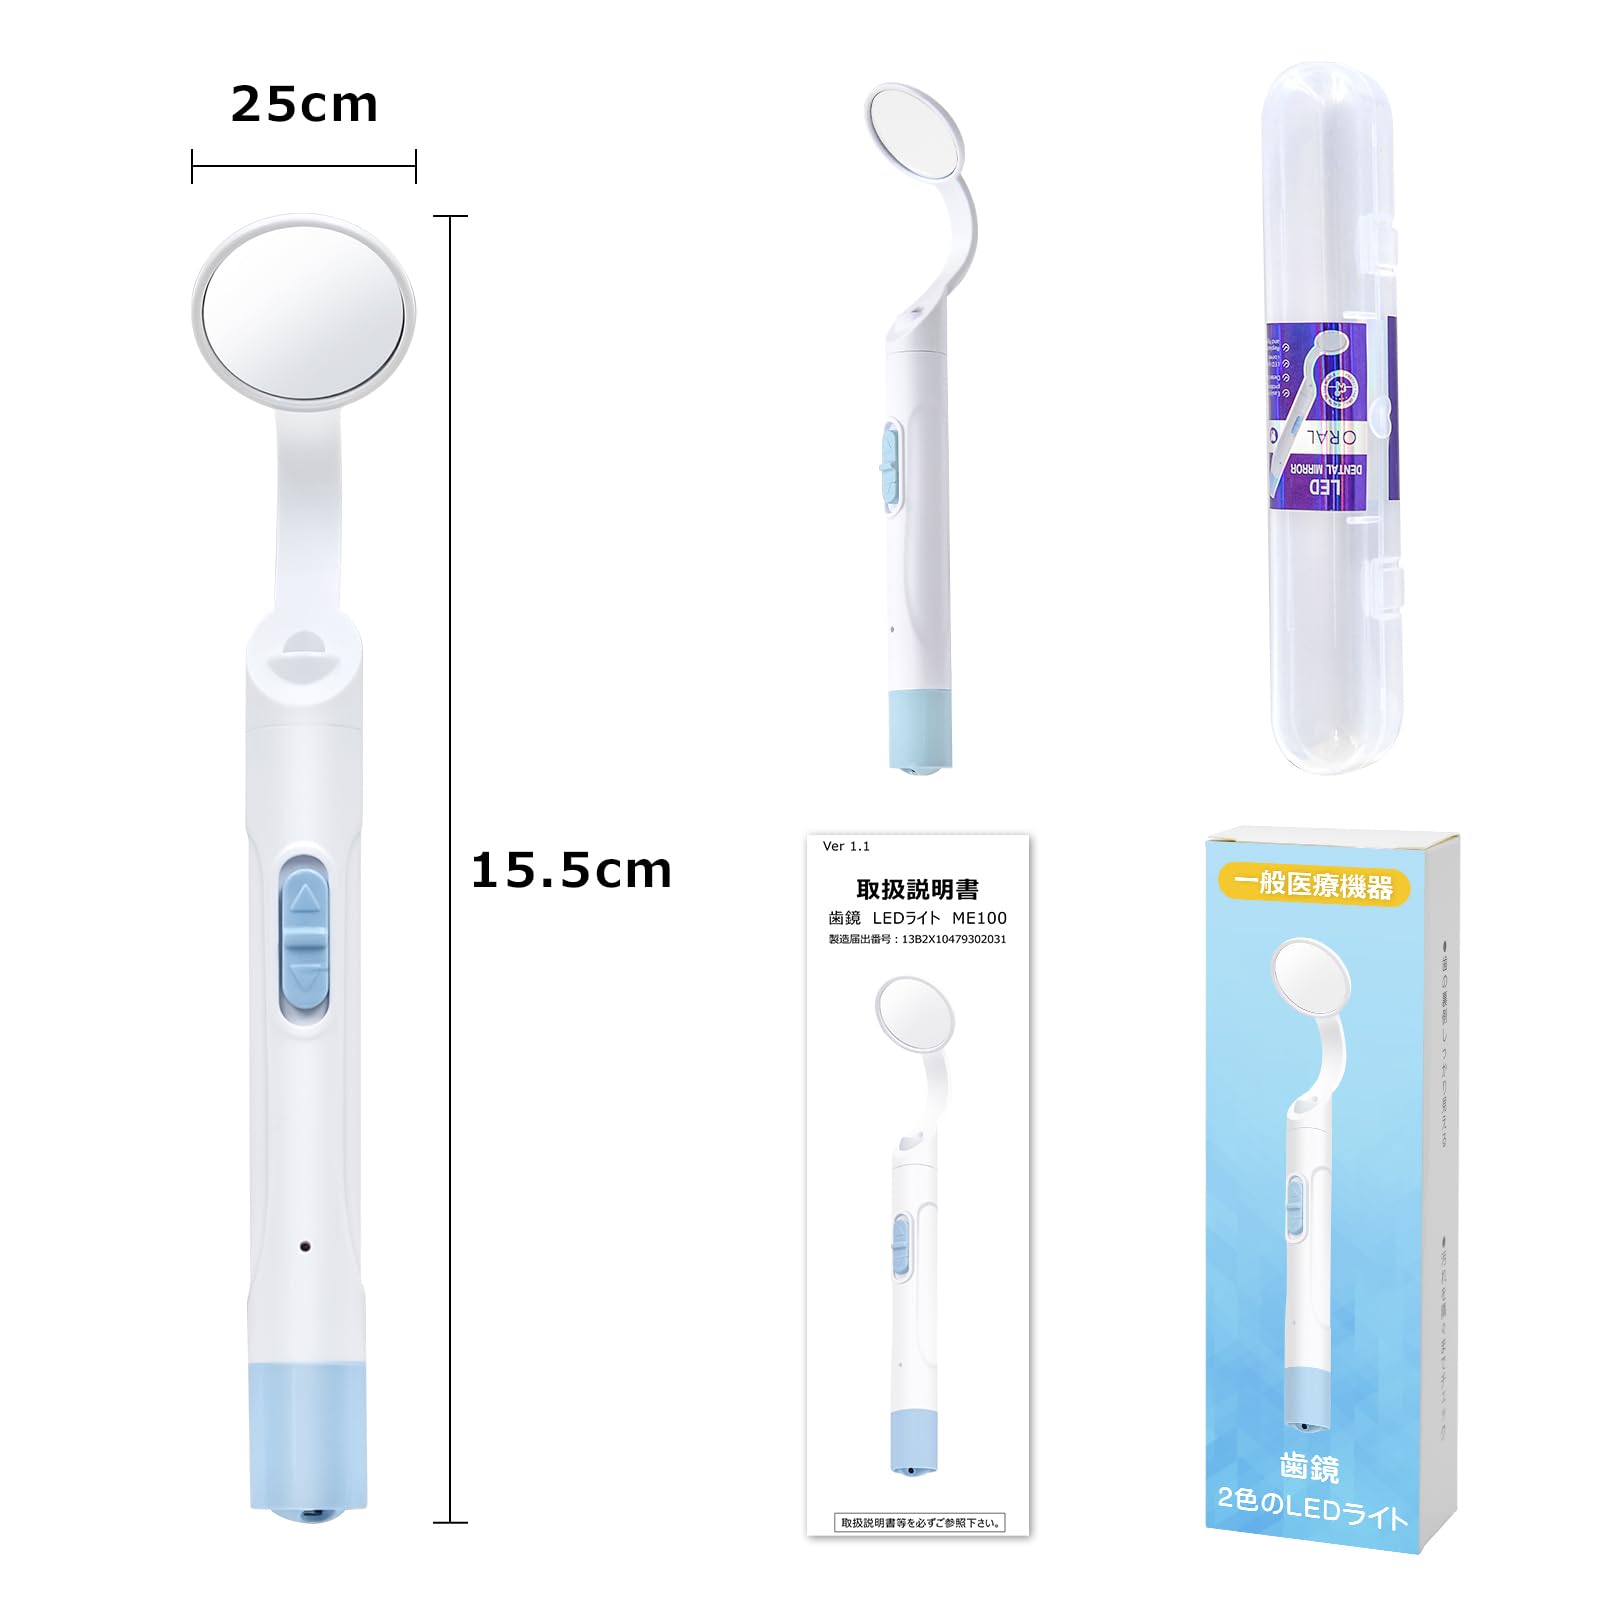  dental mirror tooth mirror tooth . for mirror LED light attaching cloudiness . difficult verification dental care oral care cavity protection tooth. dirt verification self care mirror oral cavity mi